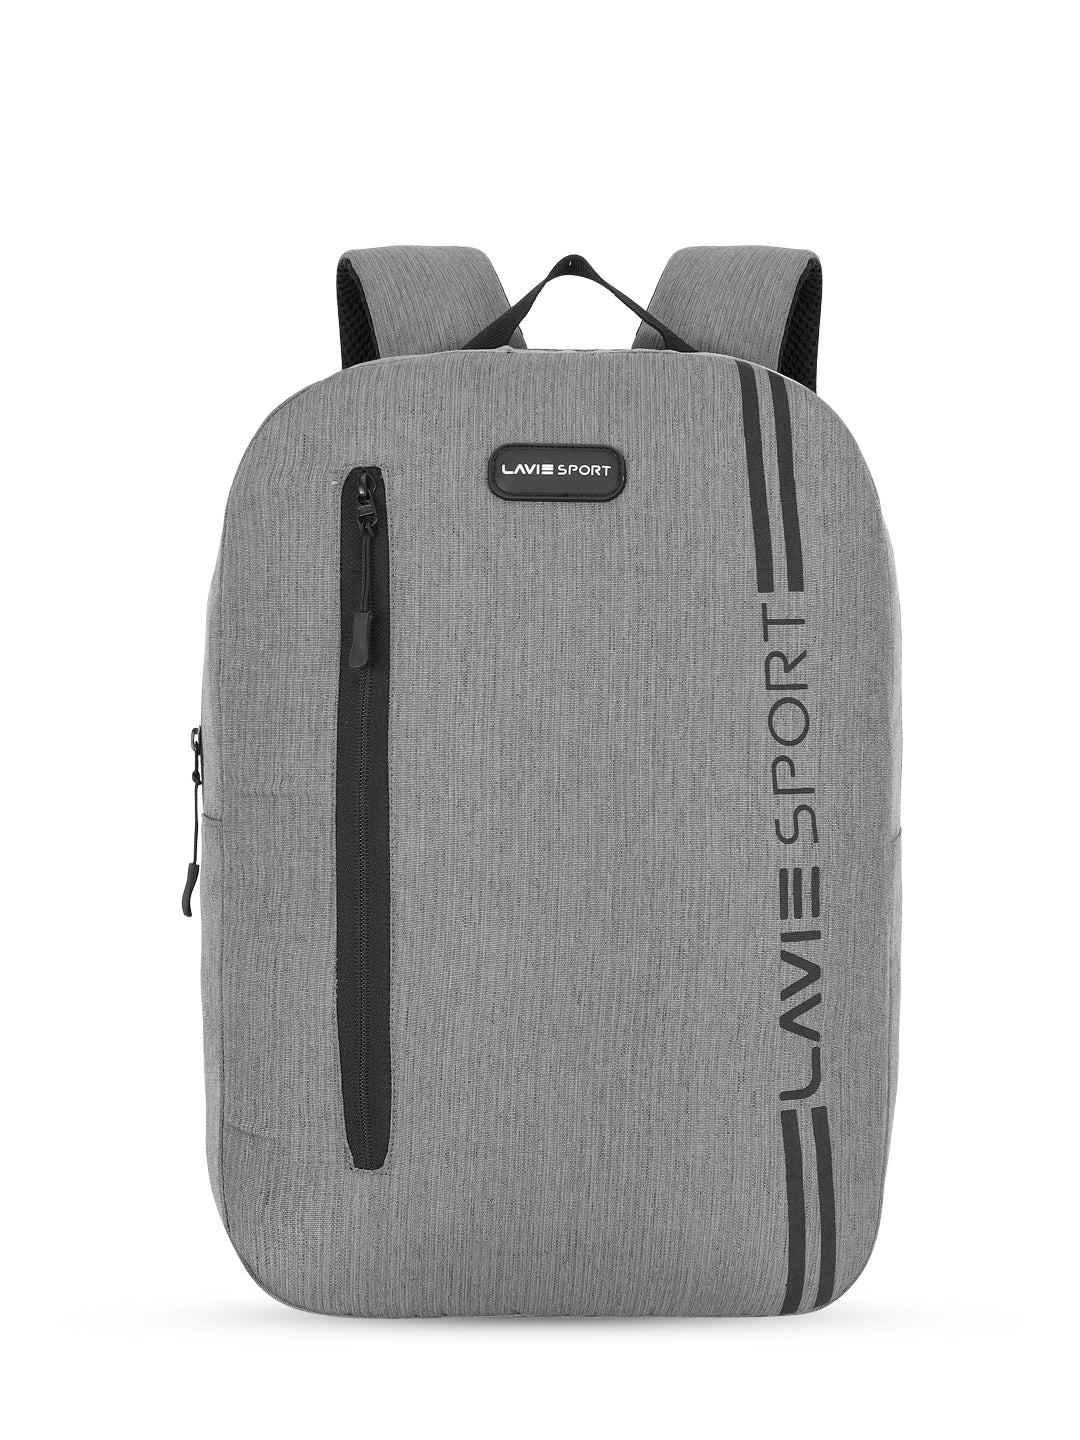 Lavie Sport 15L Hike Backpack for Girls and Boys